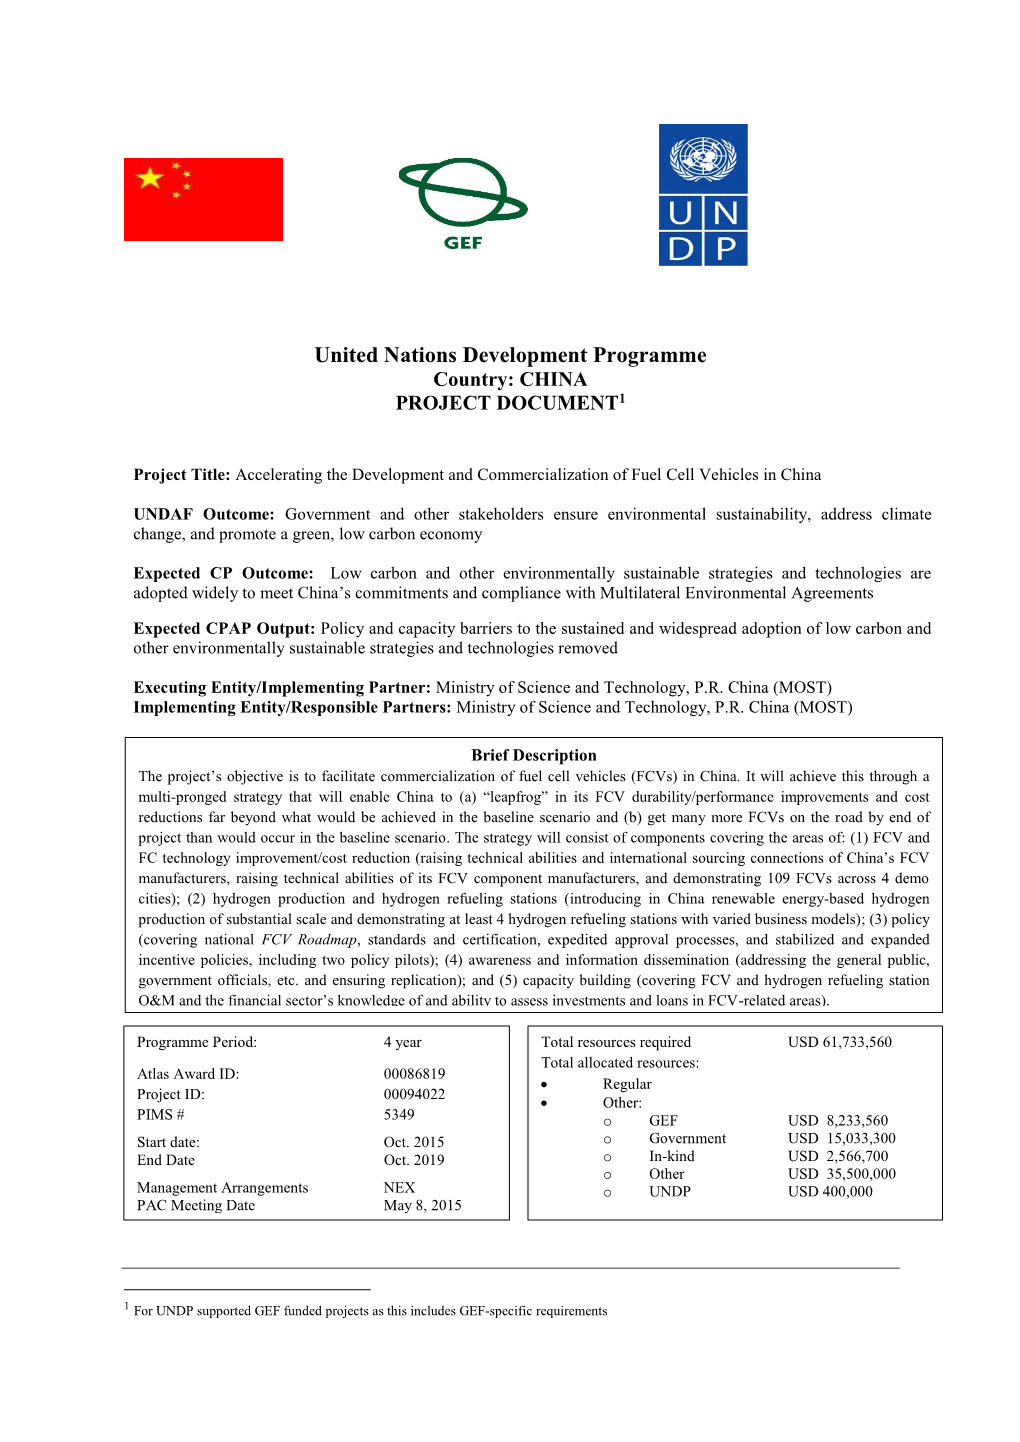 United Nations Development Programme Country: CHINA PROJECT DOCUMENT1